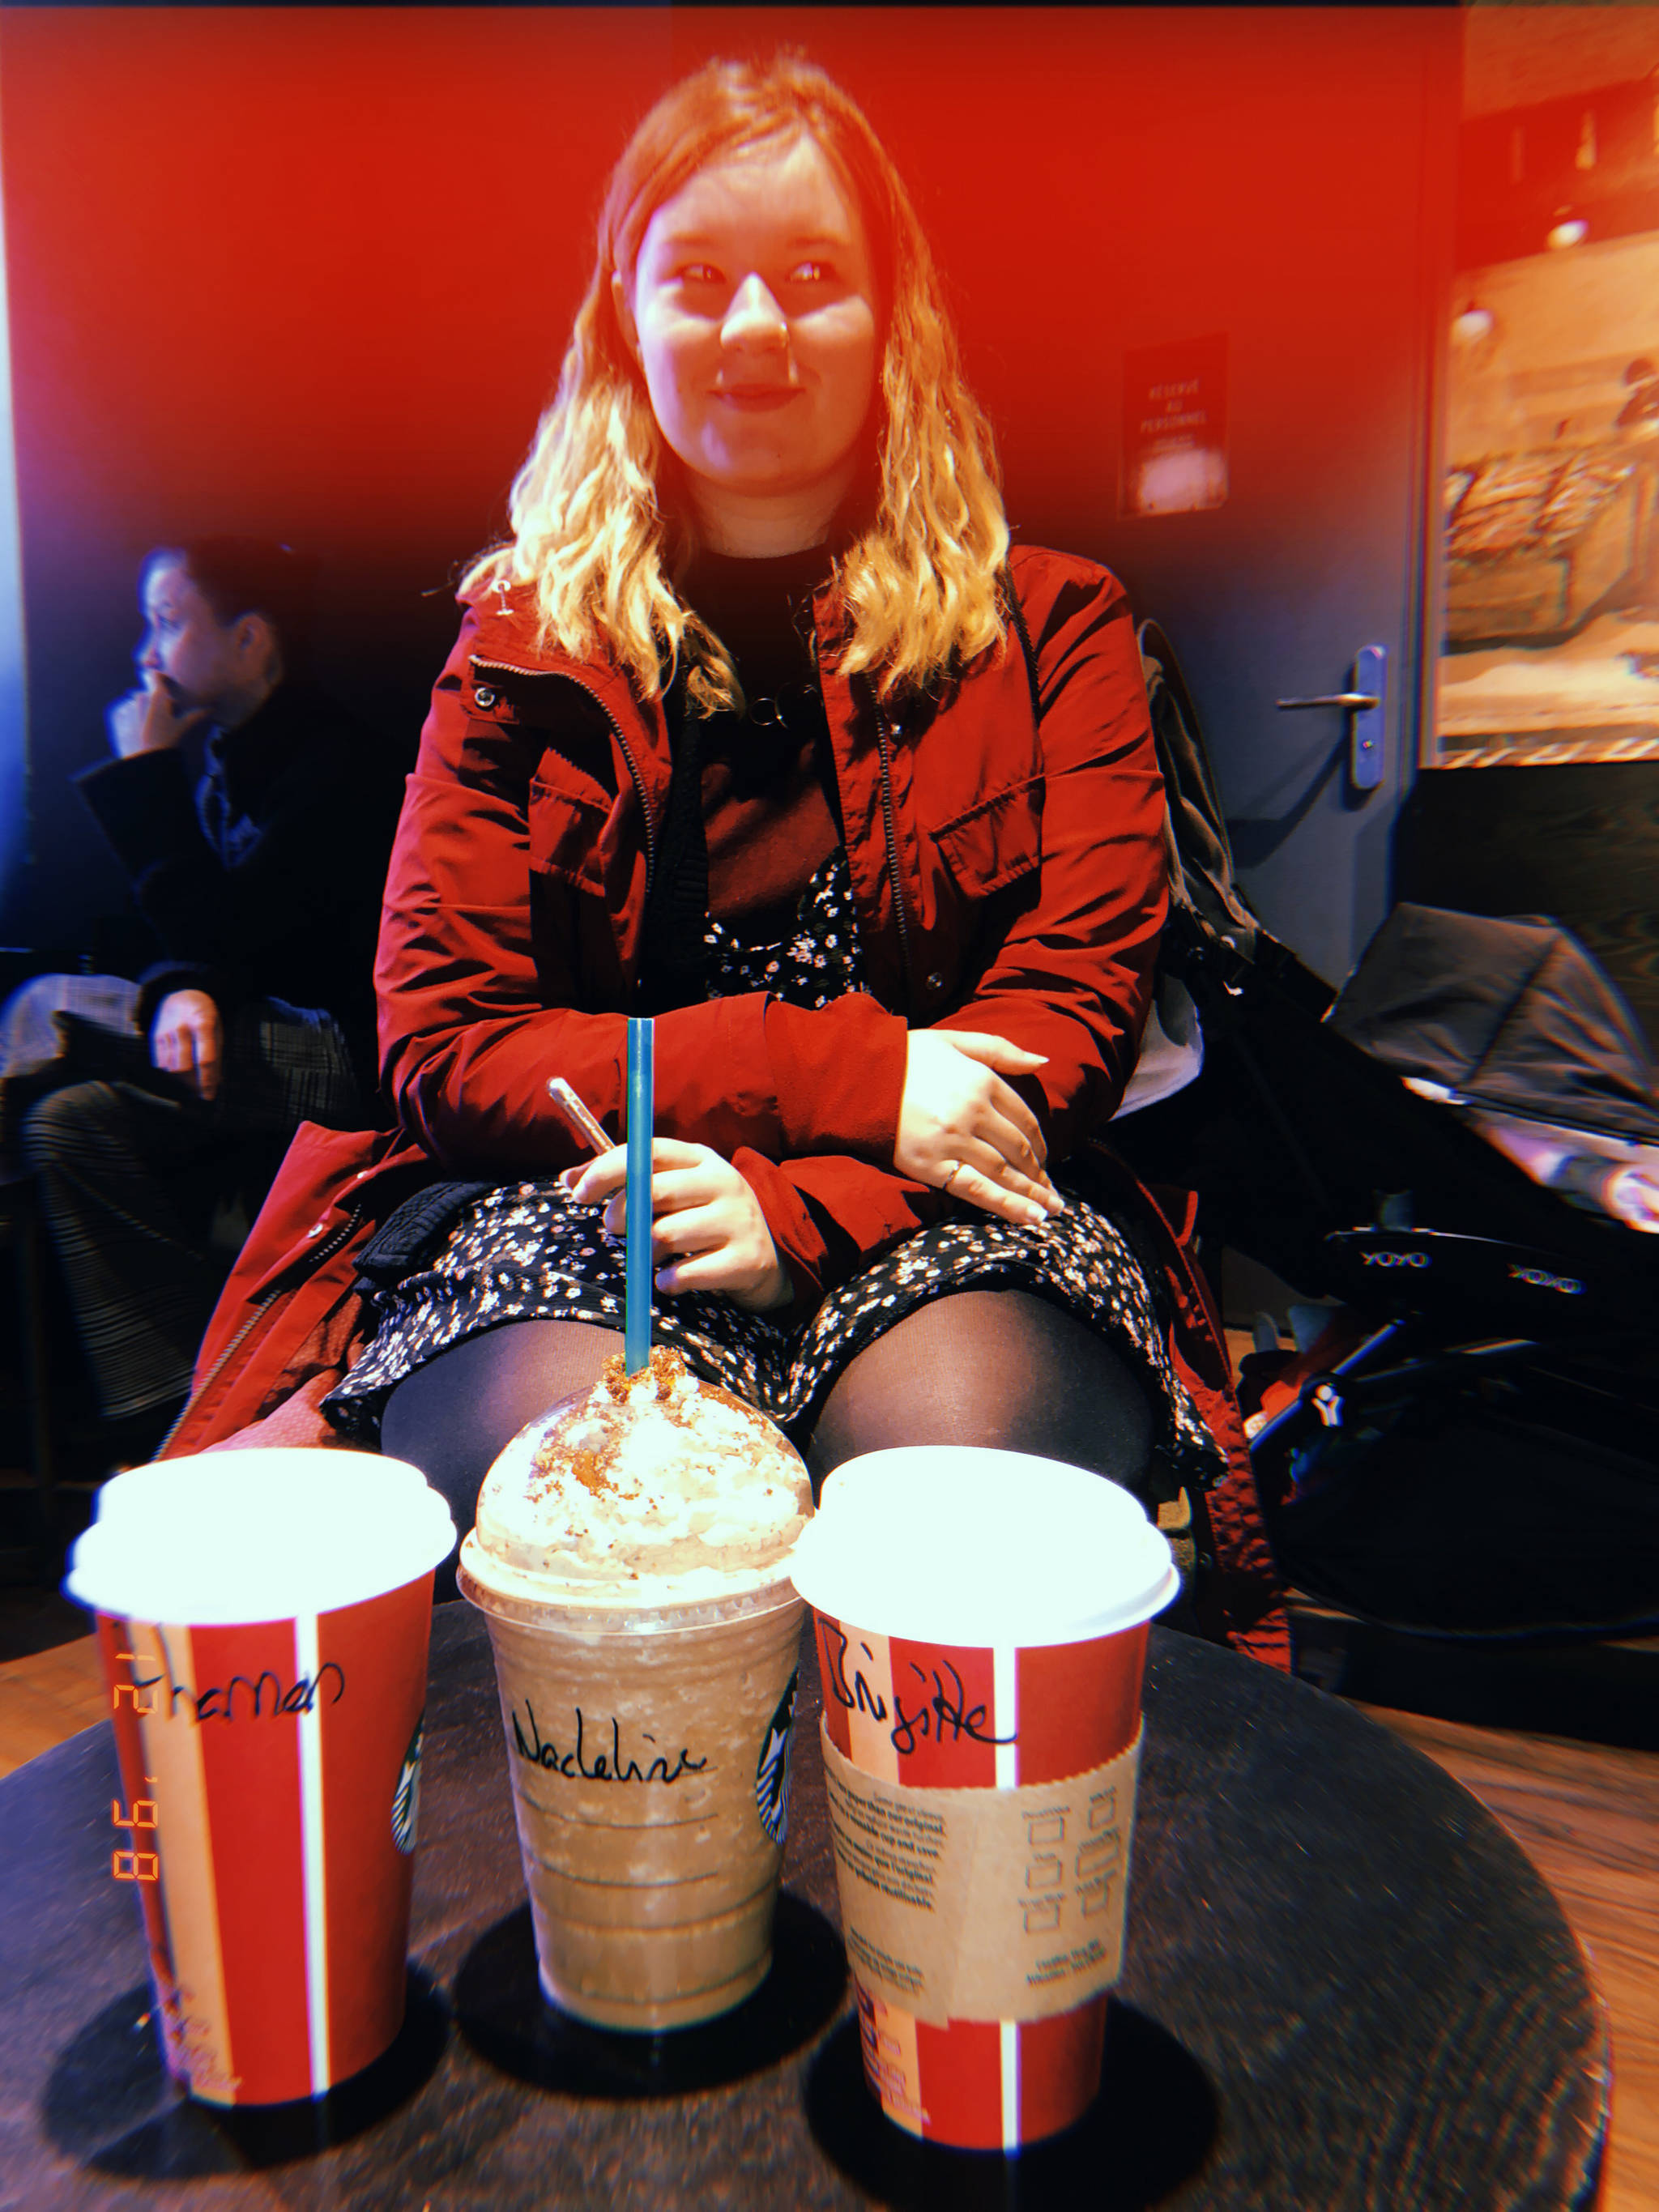 Starbucks in Nantes on Dec. 28, 2018, with funny spellings of our names. (Bridget McTague | For the Juneau Empire)